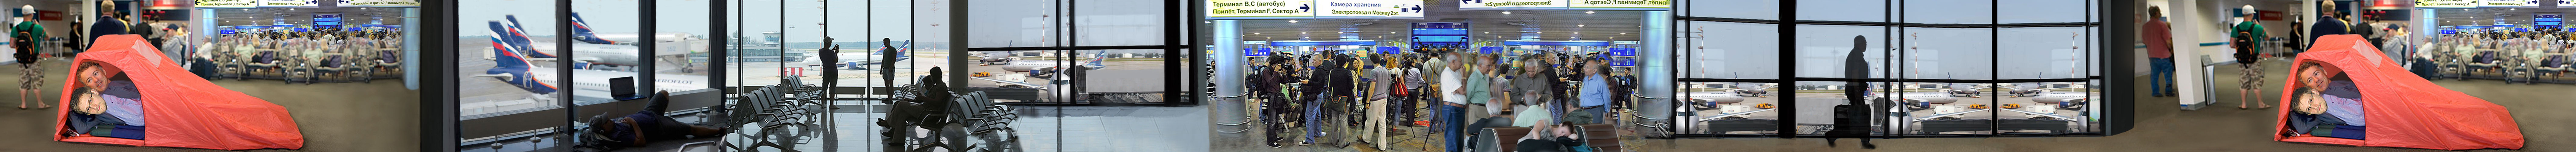 Snowden Still Stranded In Moscow Airport After Six Weeks.